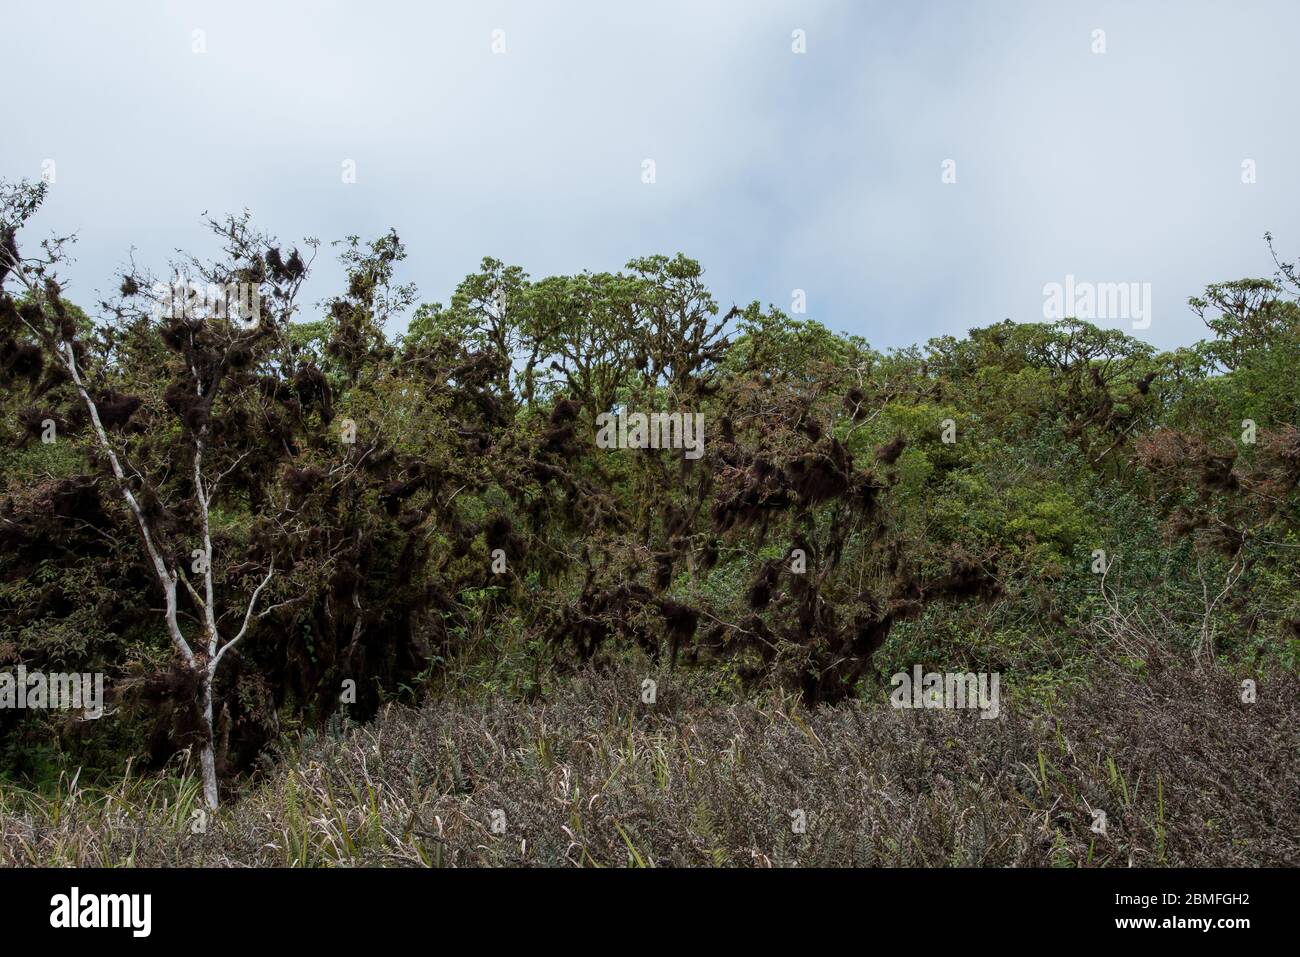 Scalesia forest around Los Gemelos craters on the highland of Santa Cruz at the Galapagos Islands. Stock Photo